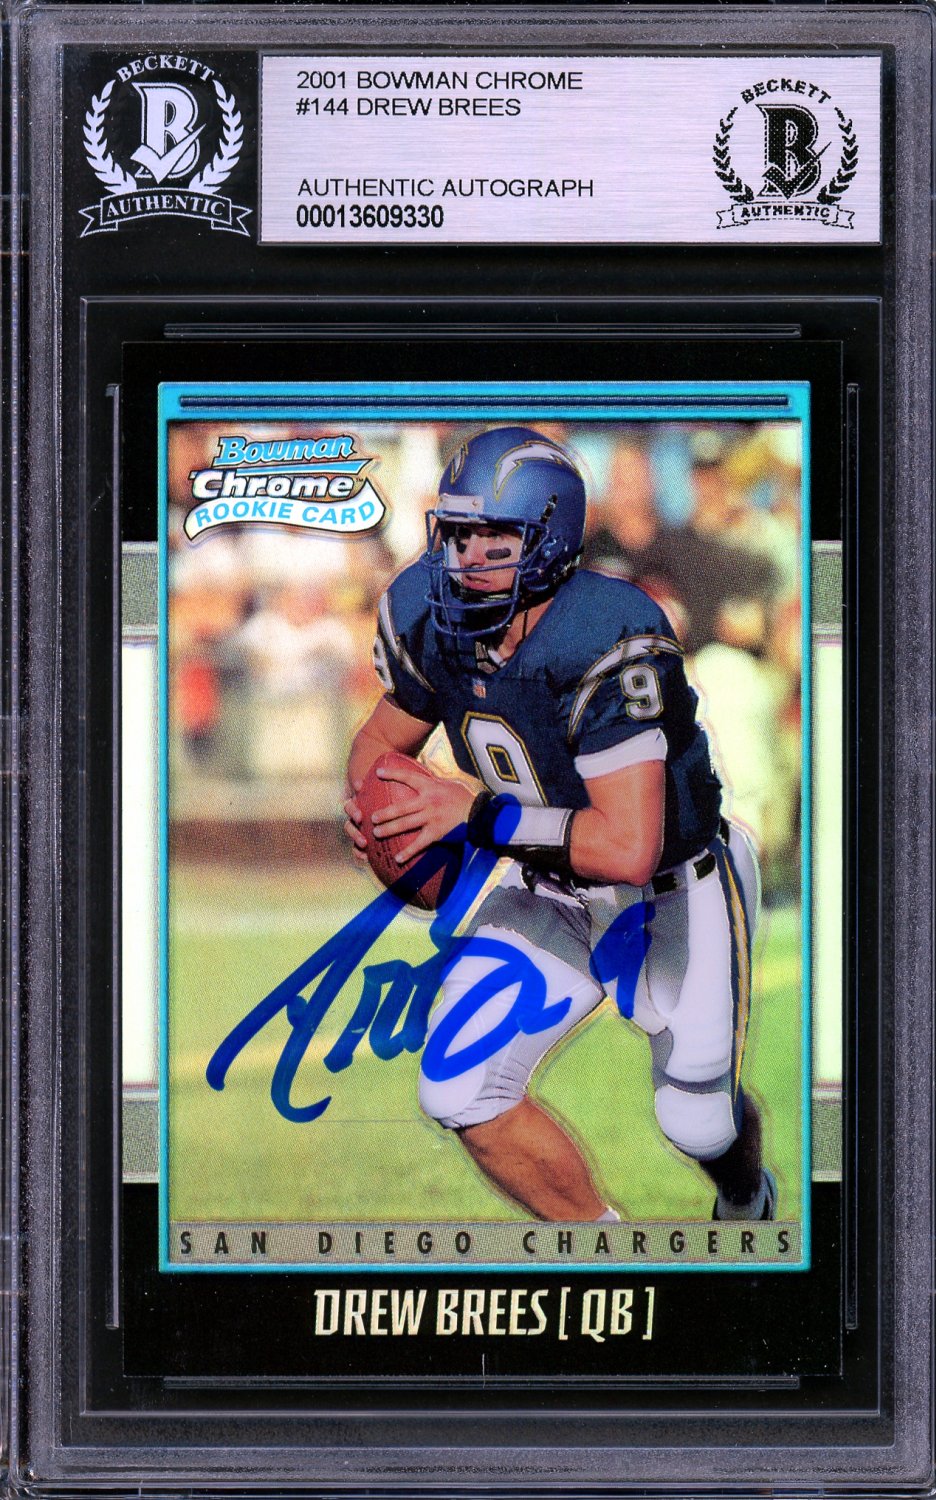 Drew Brees Autographed Signed 2001 Bowman Chrome Refractor Rookie